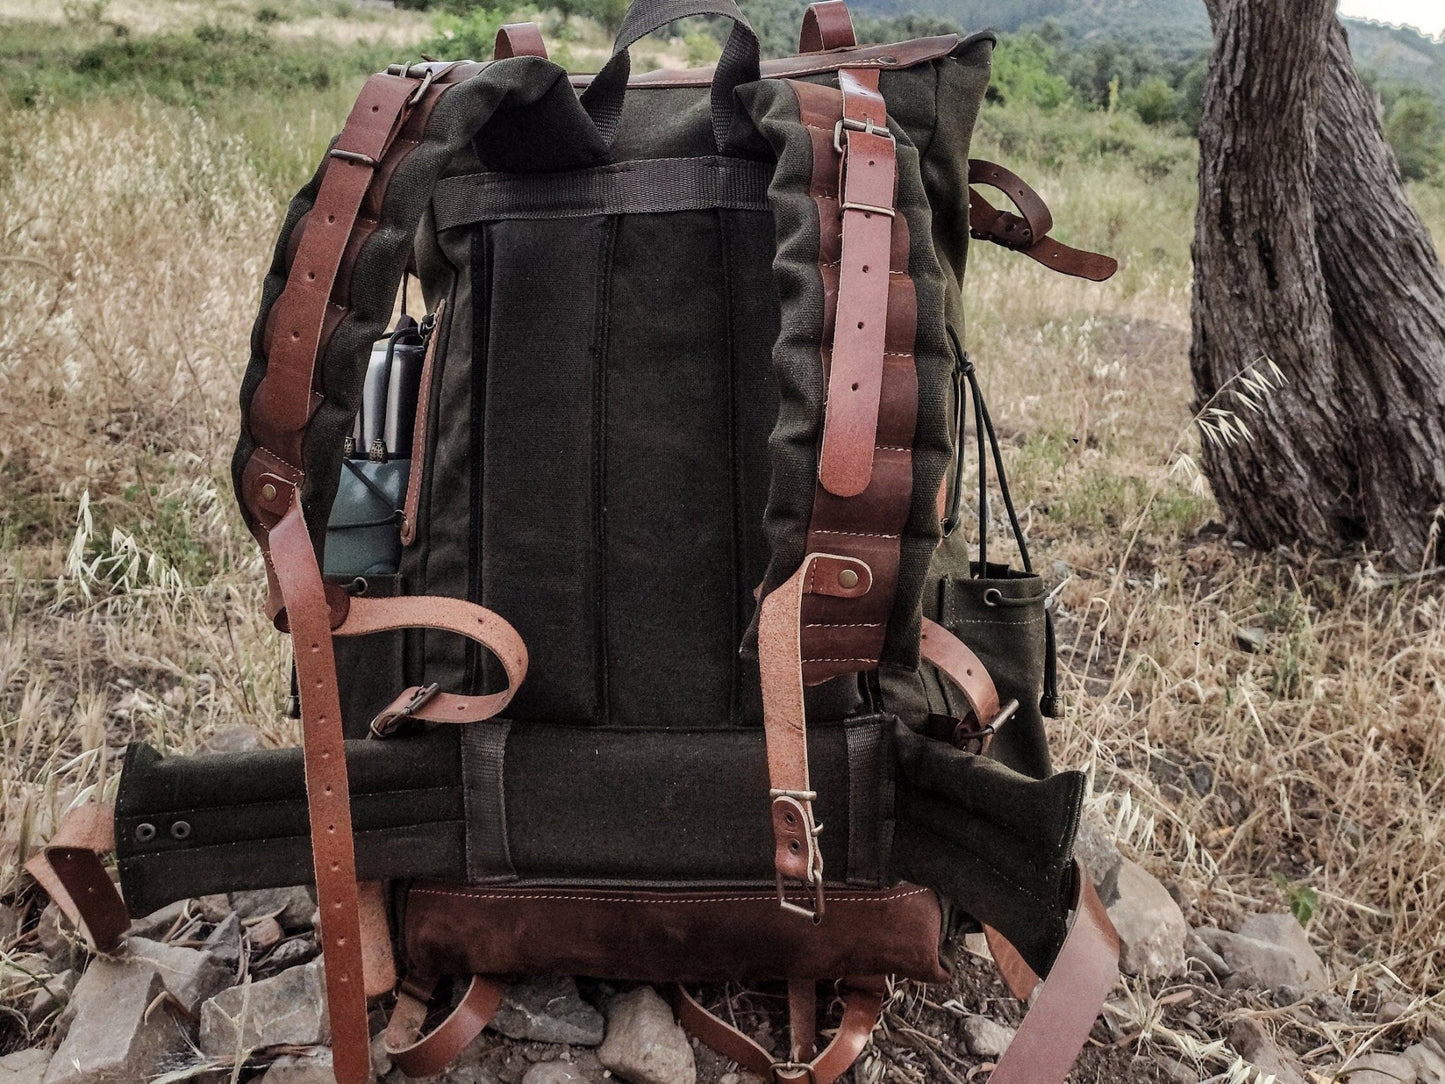 30 Liter to 80 Liter Bushcraft Backpack  Camping Backpack Hiking backpack Canvas Leather Backpack with Black-Brown-Green options,  99percenthandmade   